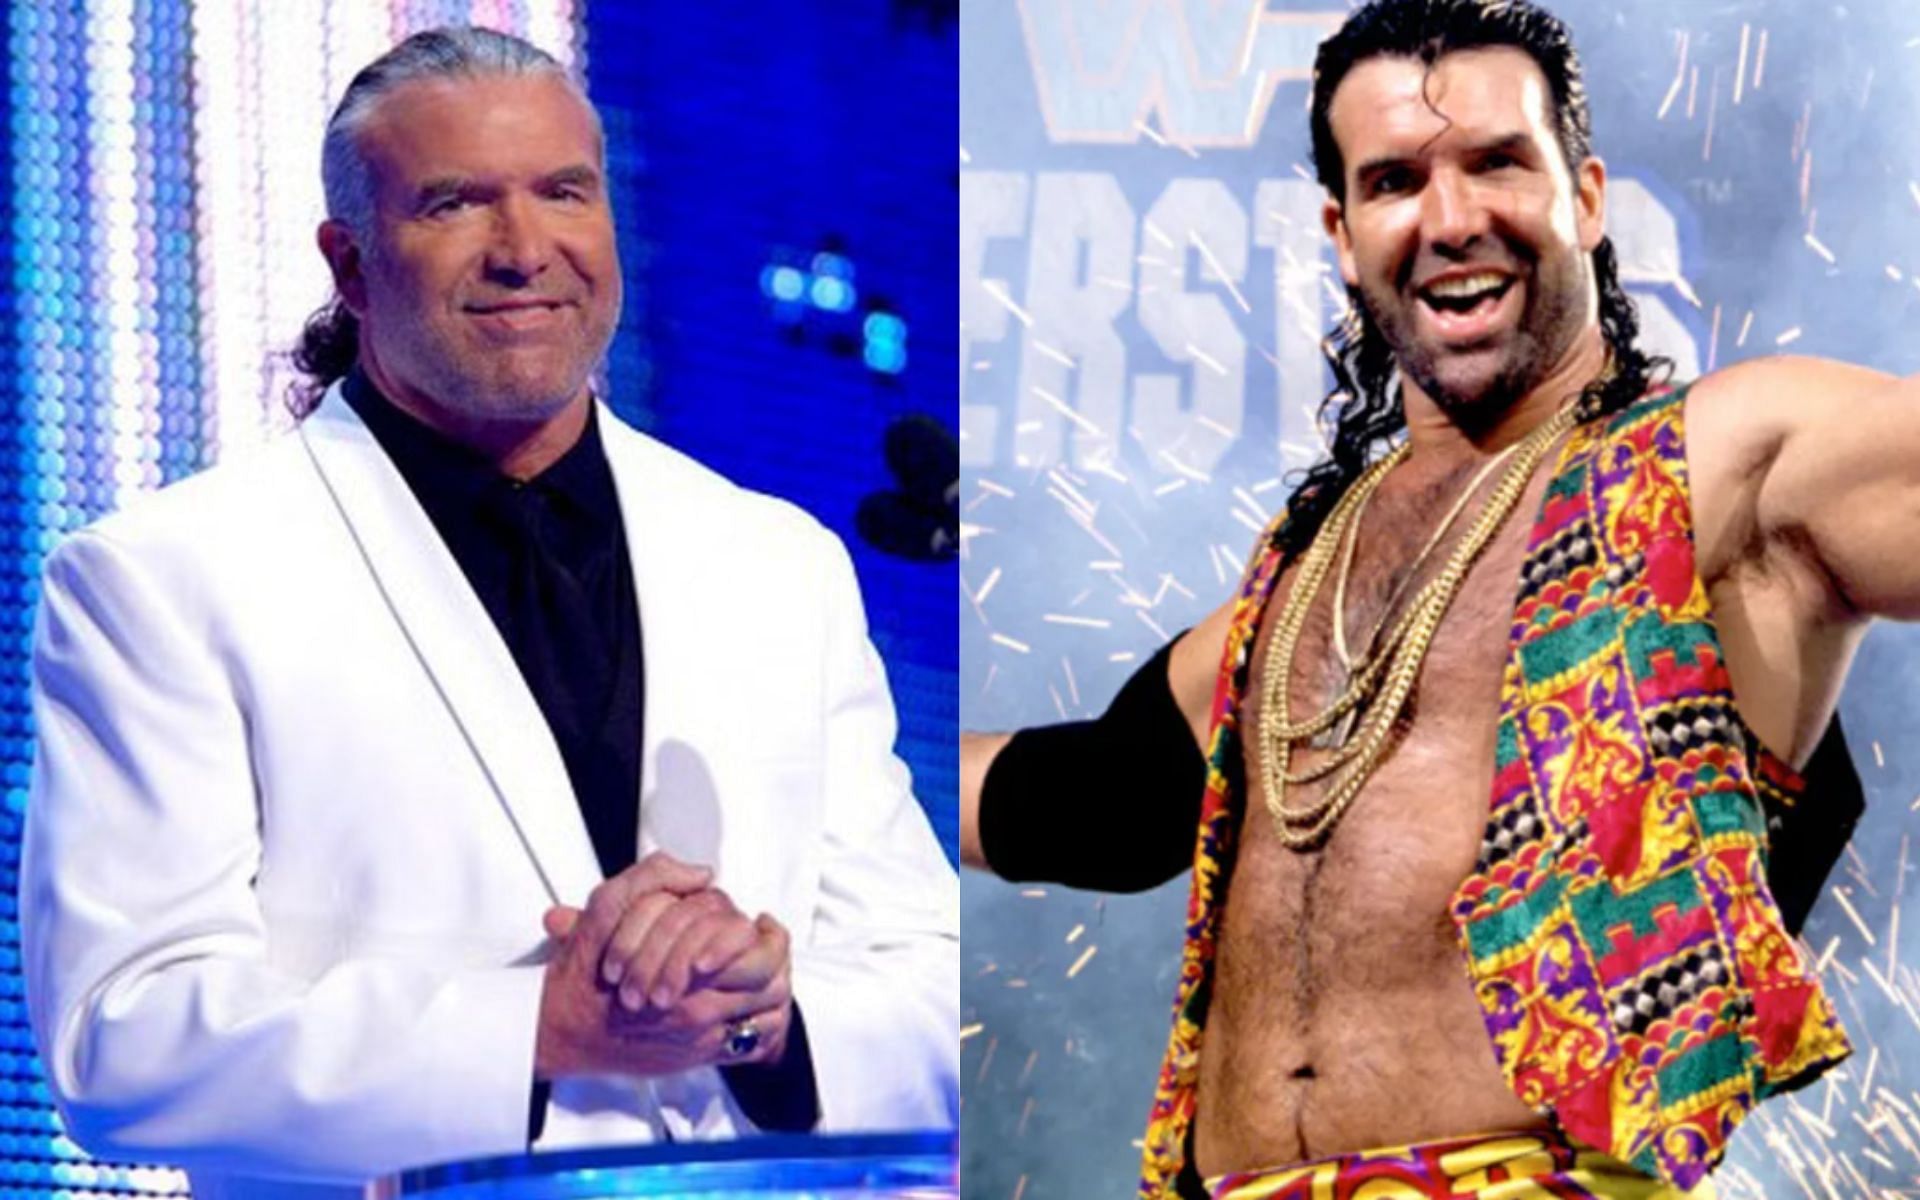 Scott Hall had an expansive and influential wrestling career 